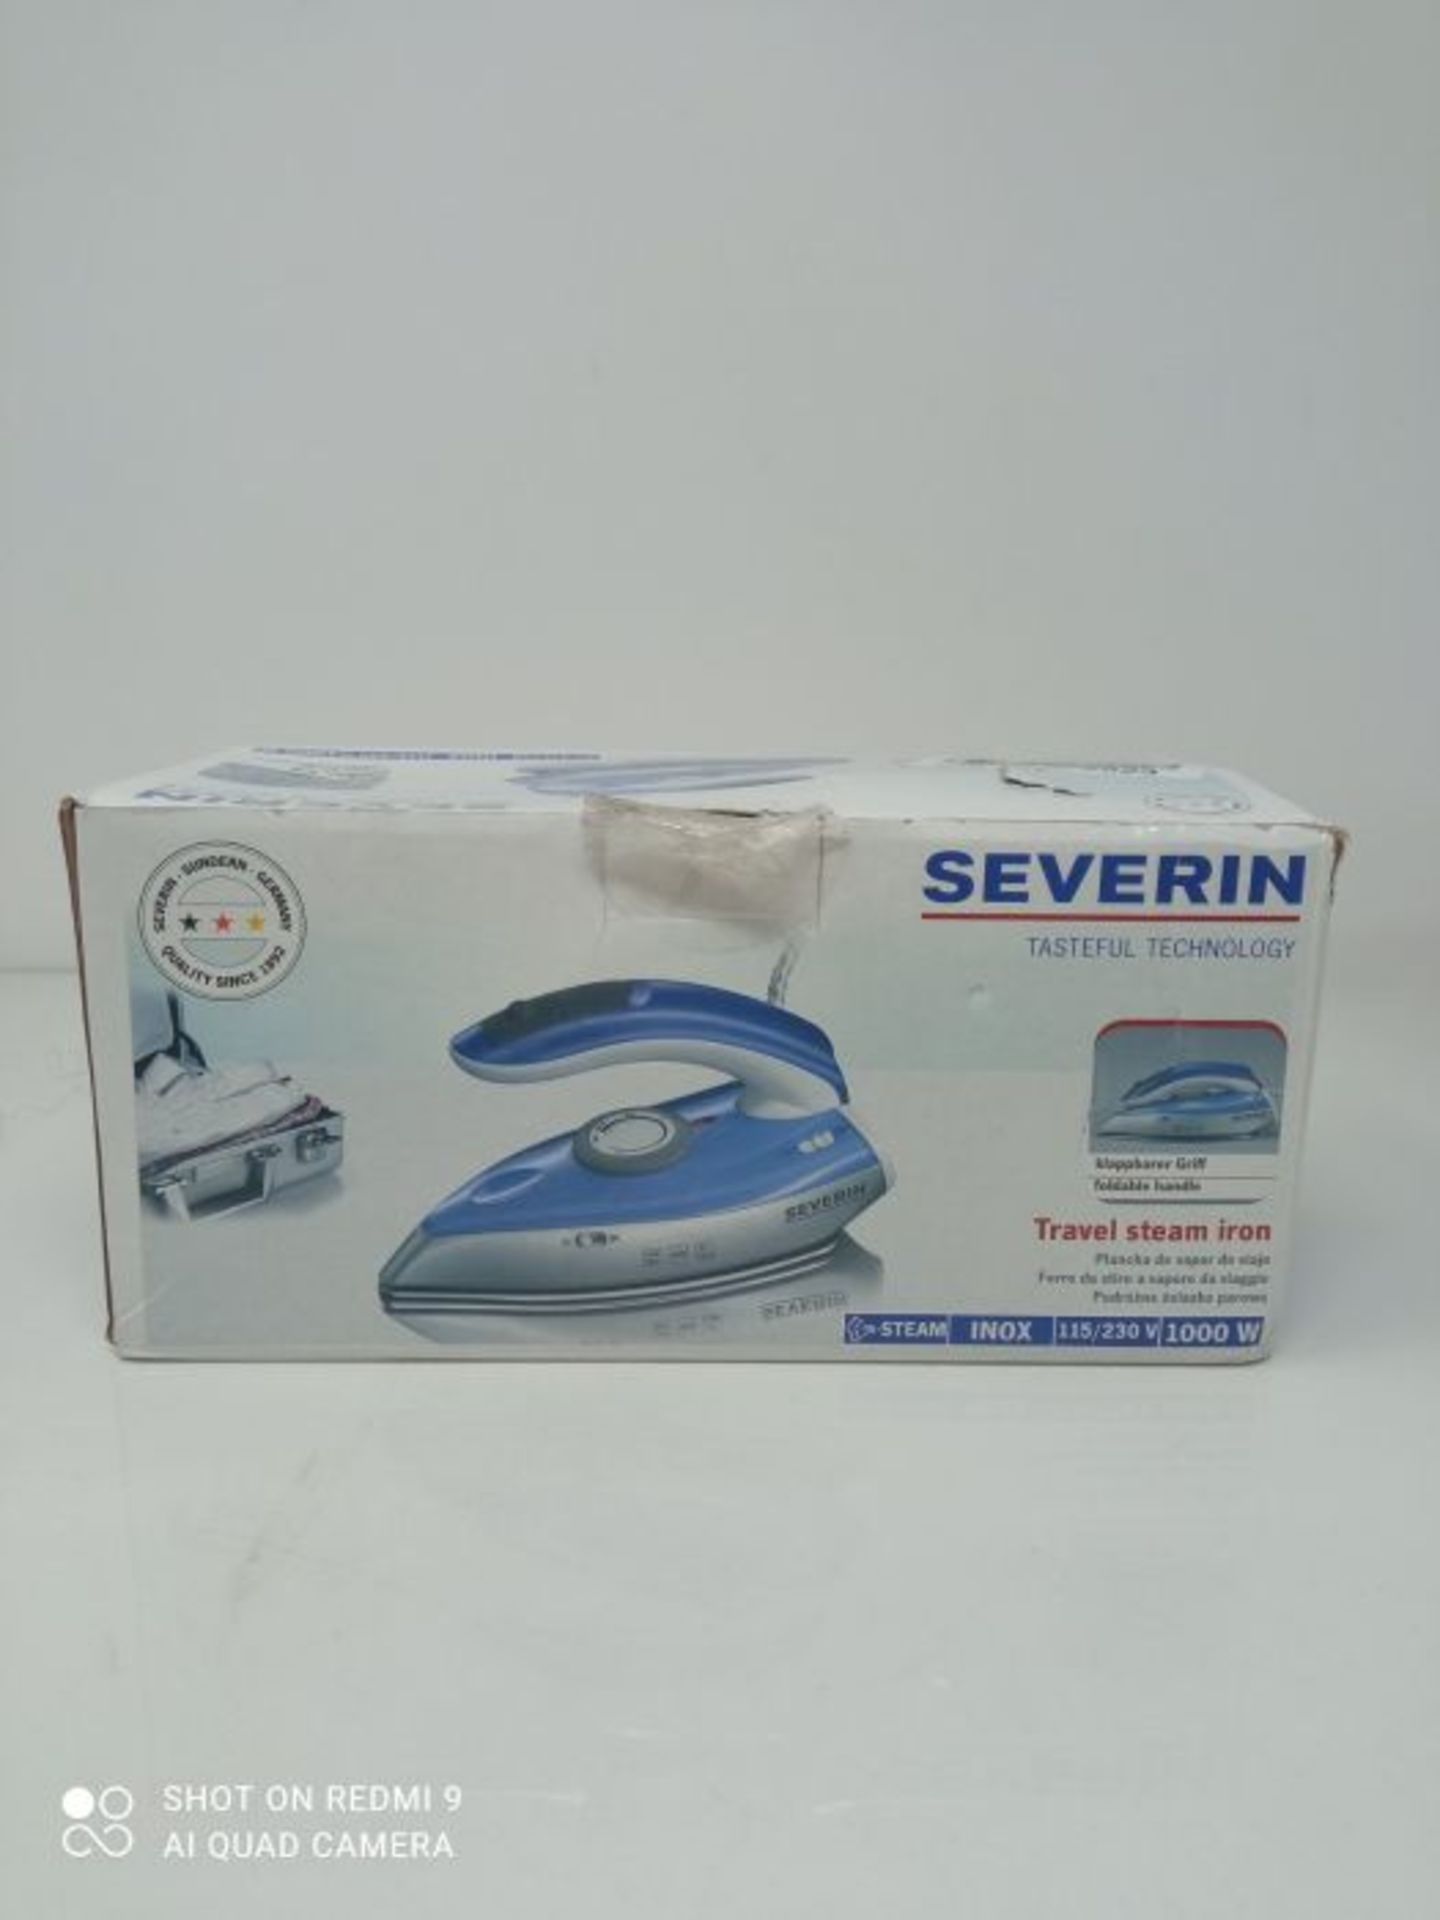 SEVERIN Travel STEAM Iron BA 3234 / Silver - Blue, 1000W, 50ml Water Tank and Foldable - Image 2 of 3